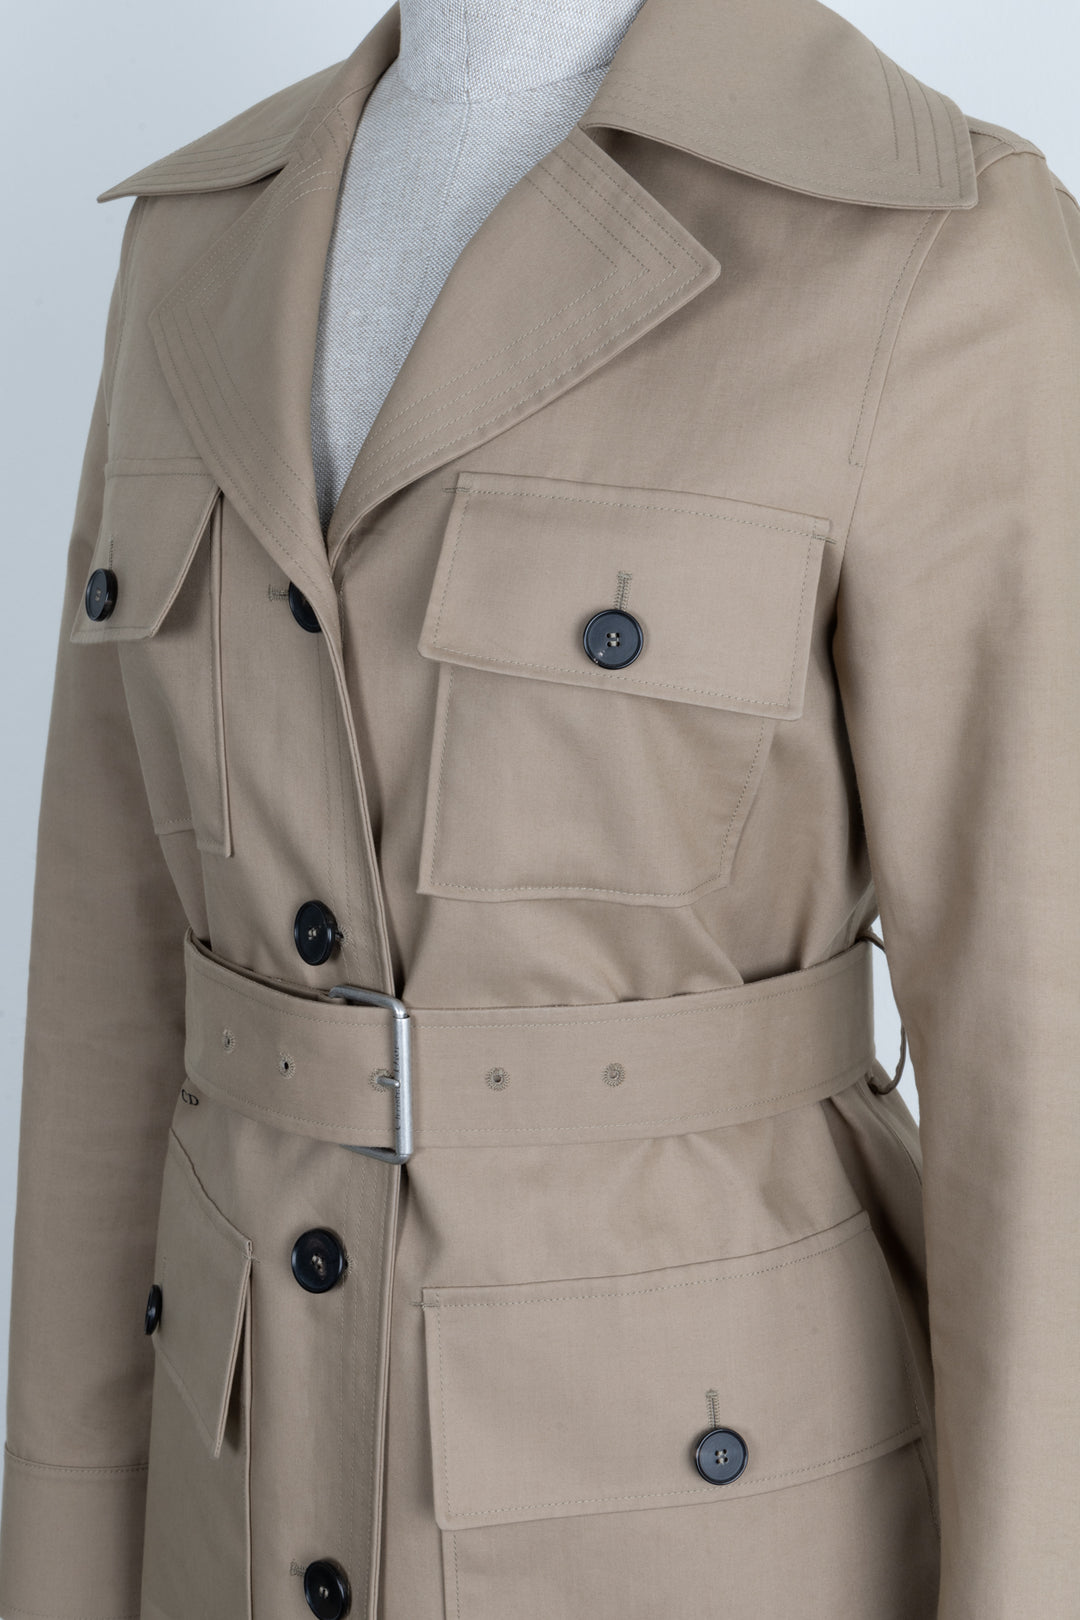 CHRISTIAN DIOR Trench Coat Beige